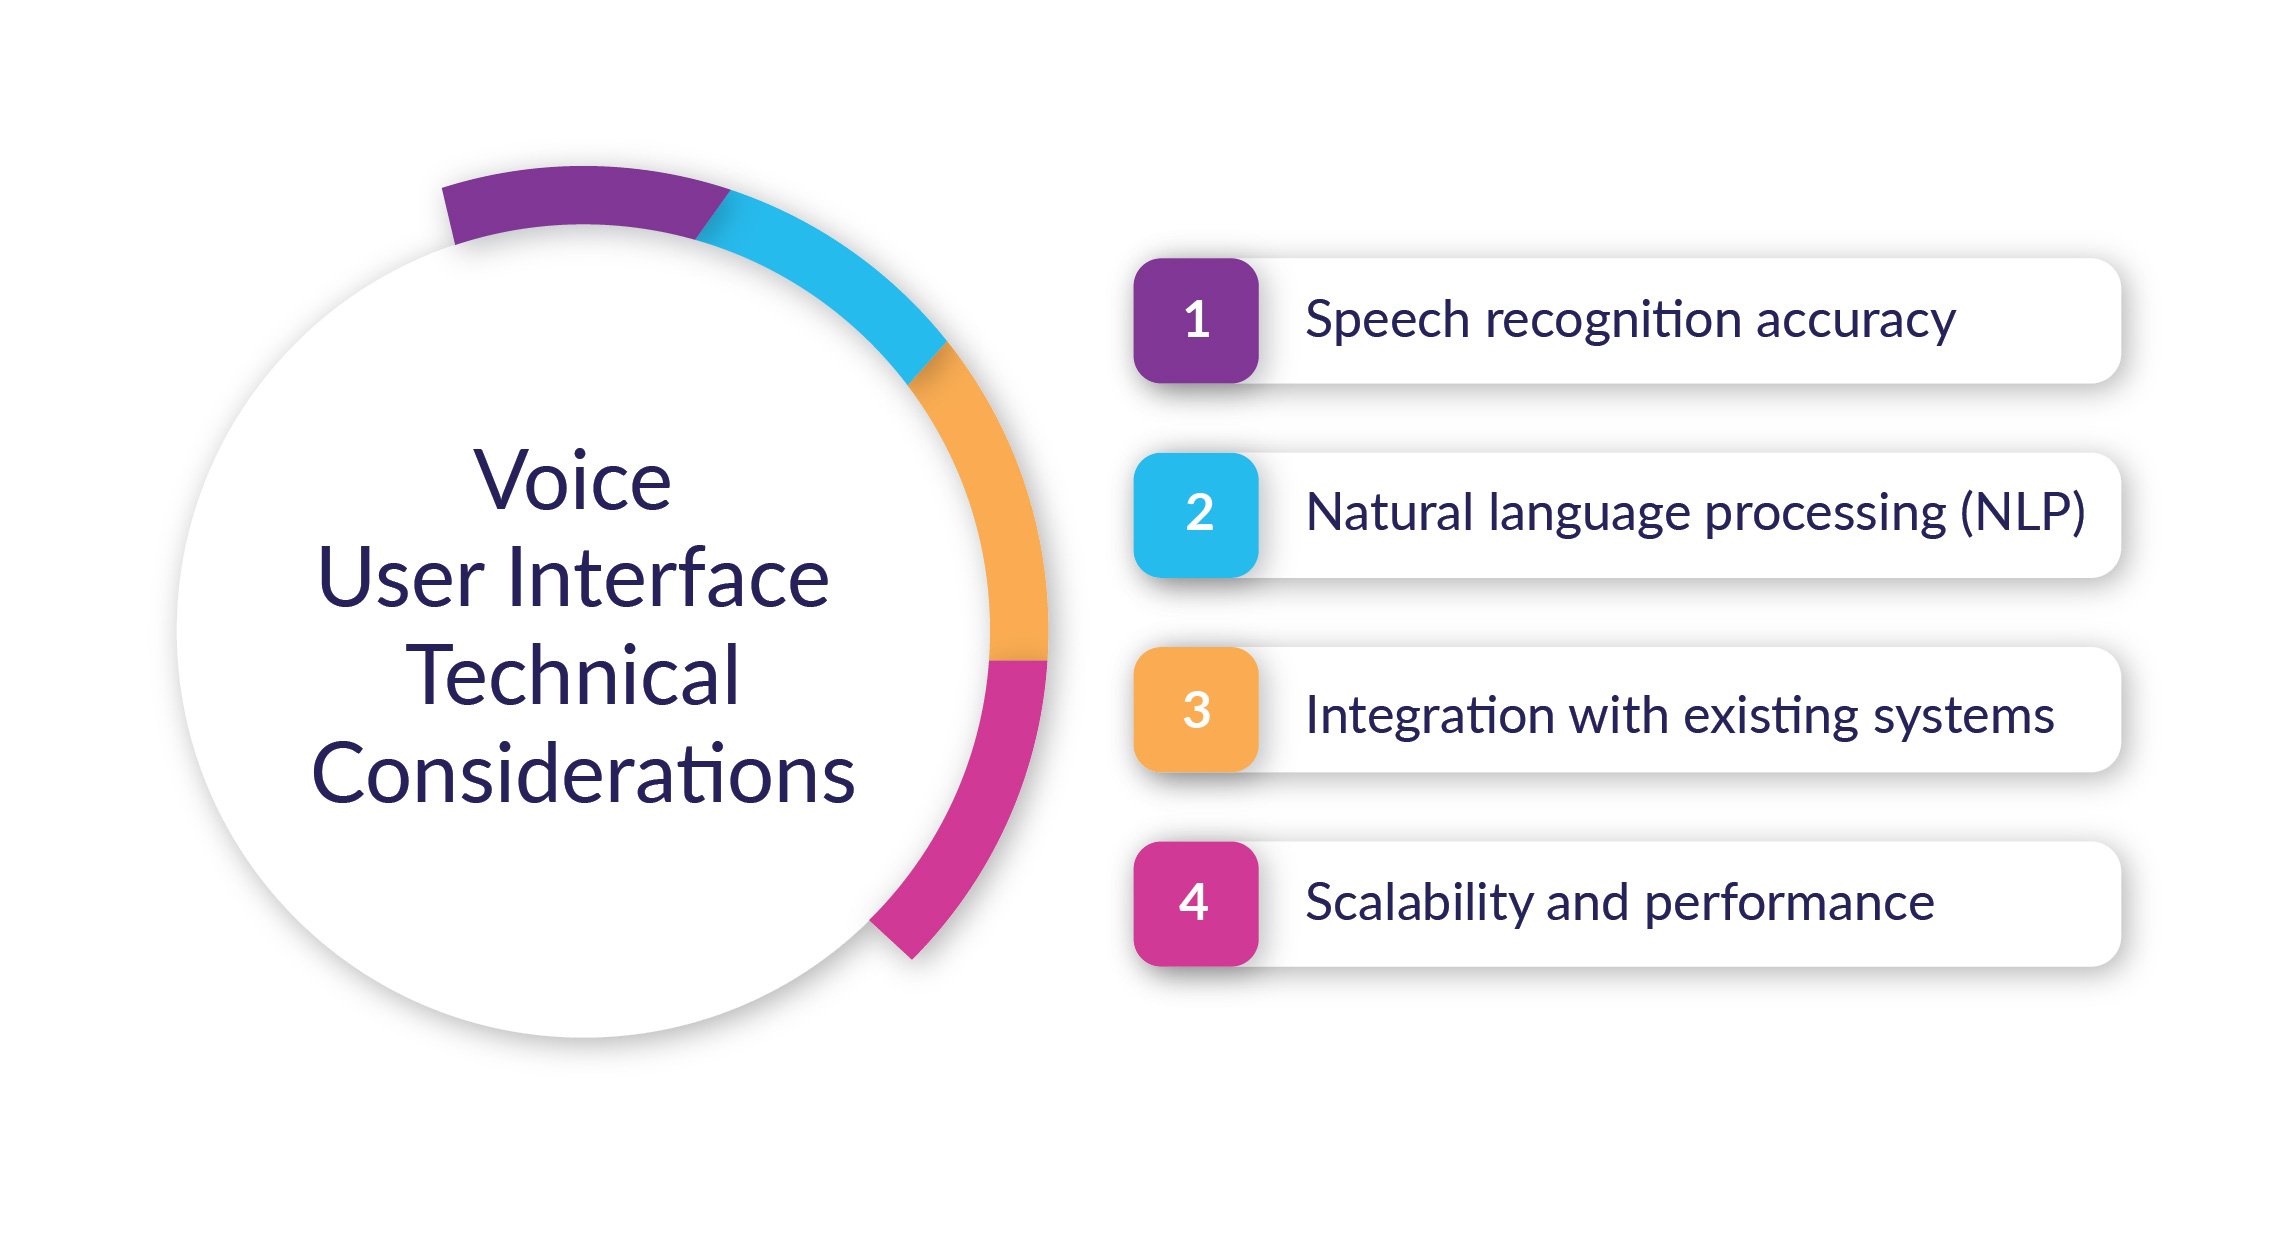 Voice User Interface Technical Considerations